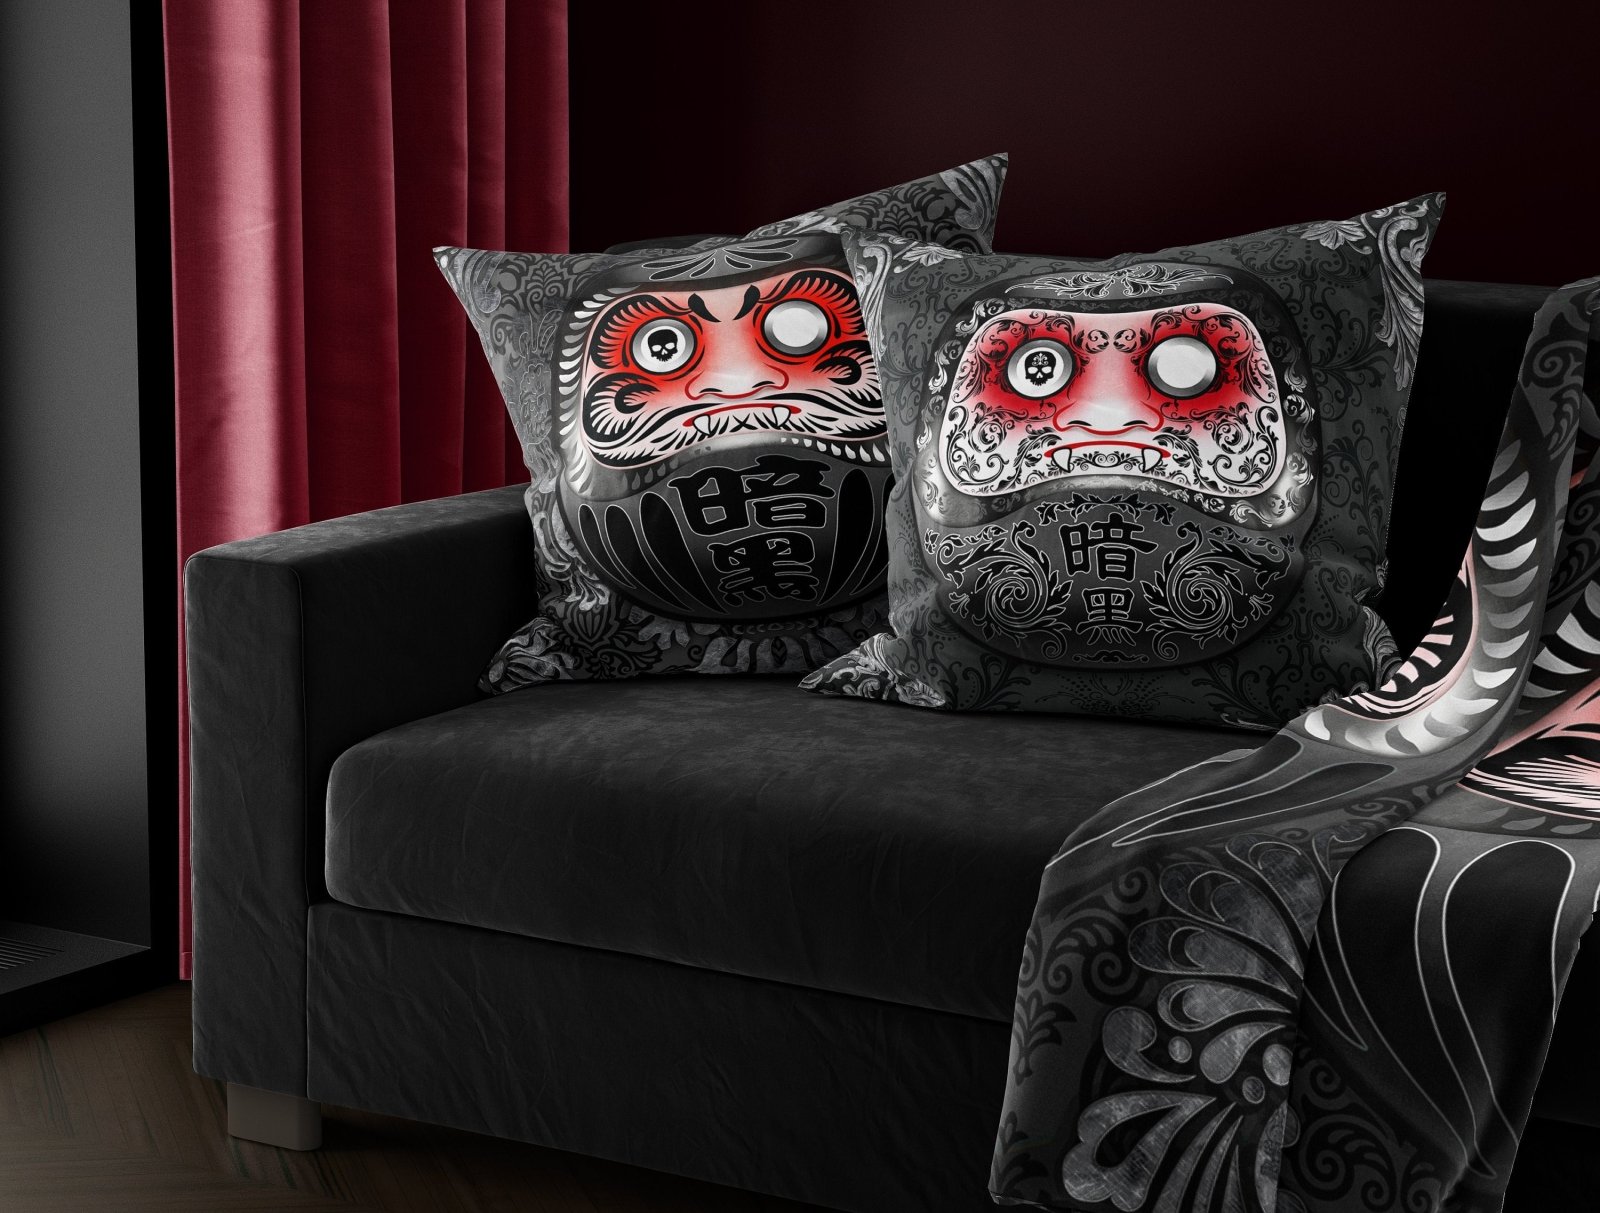 Black Daruma Throw Pillow, Decorative Accent Pillow, Square Cushion Cover,  Goth Japanese Art, Eclectic Room Decor